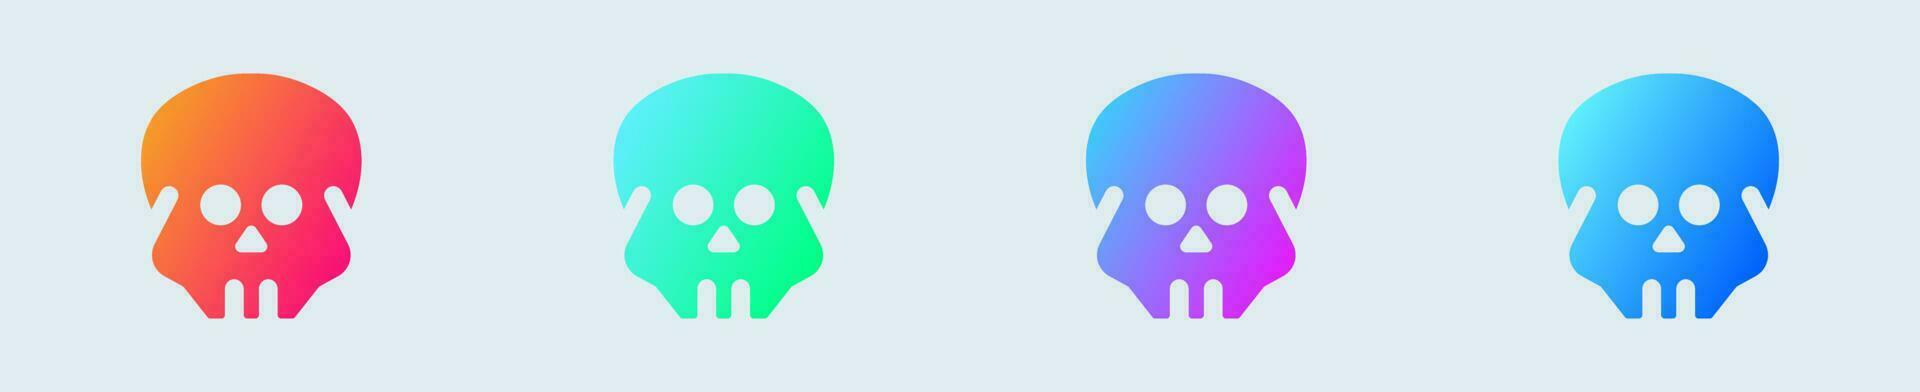 Skull solid icon in gradient colors. Skeleton signs vector illustration.